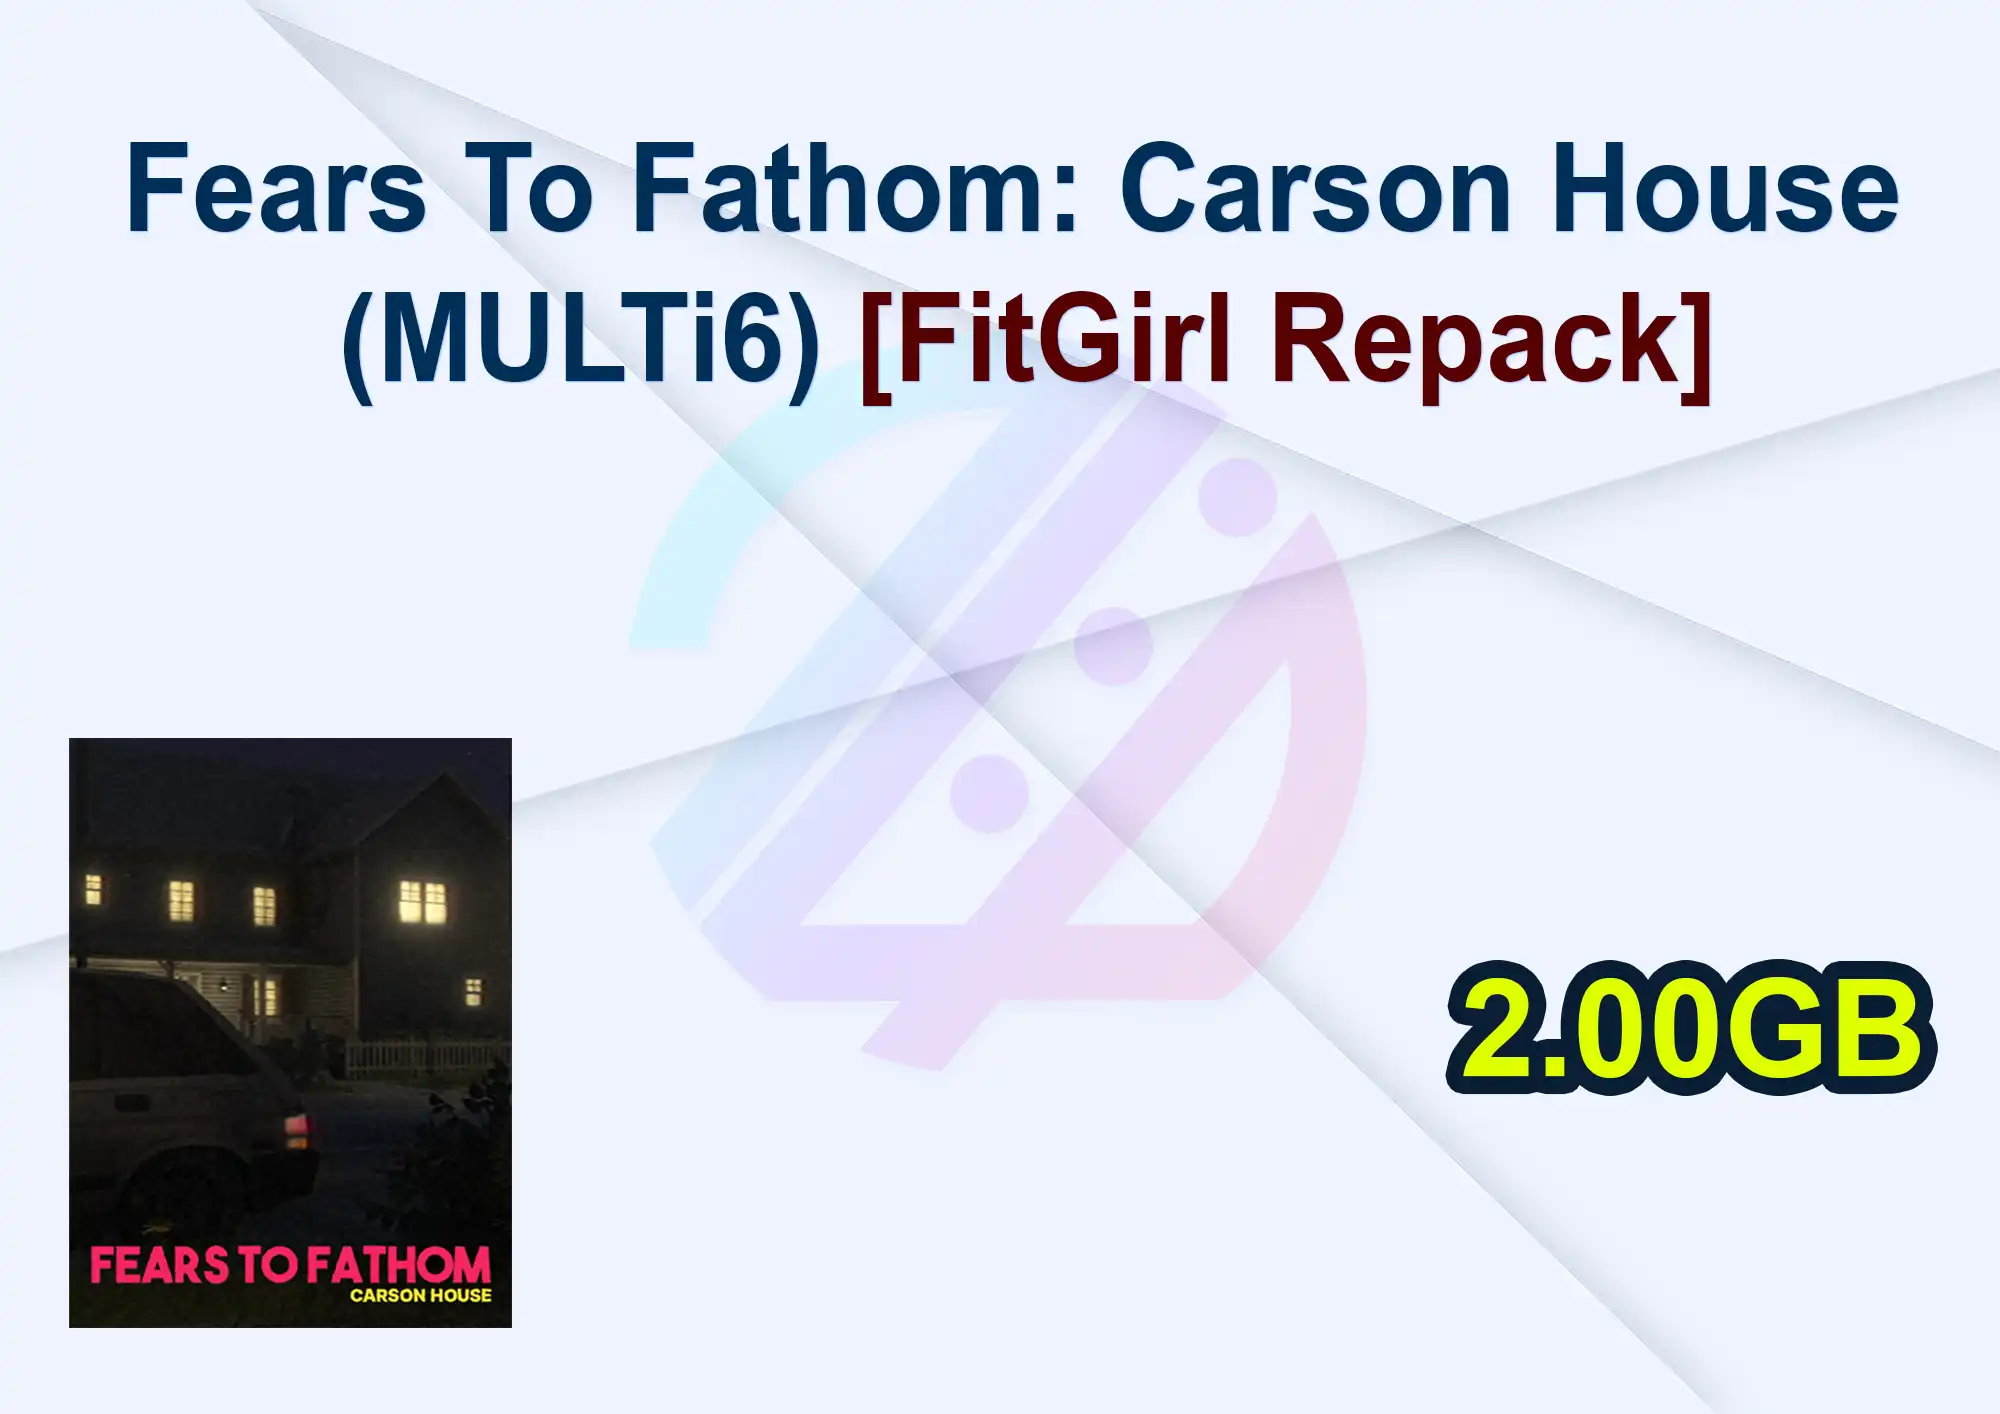 Fears To Fathom: Carson House (MULTi6) [FitGirl Repack]